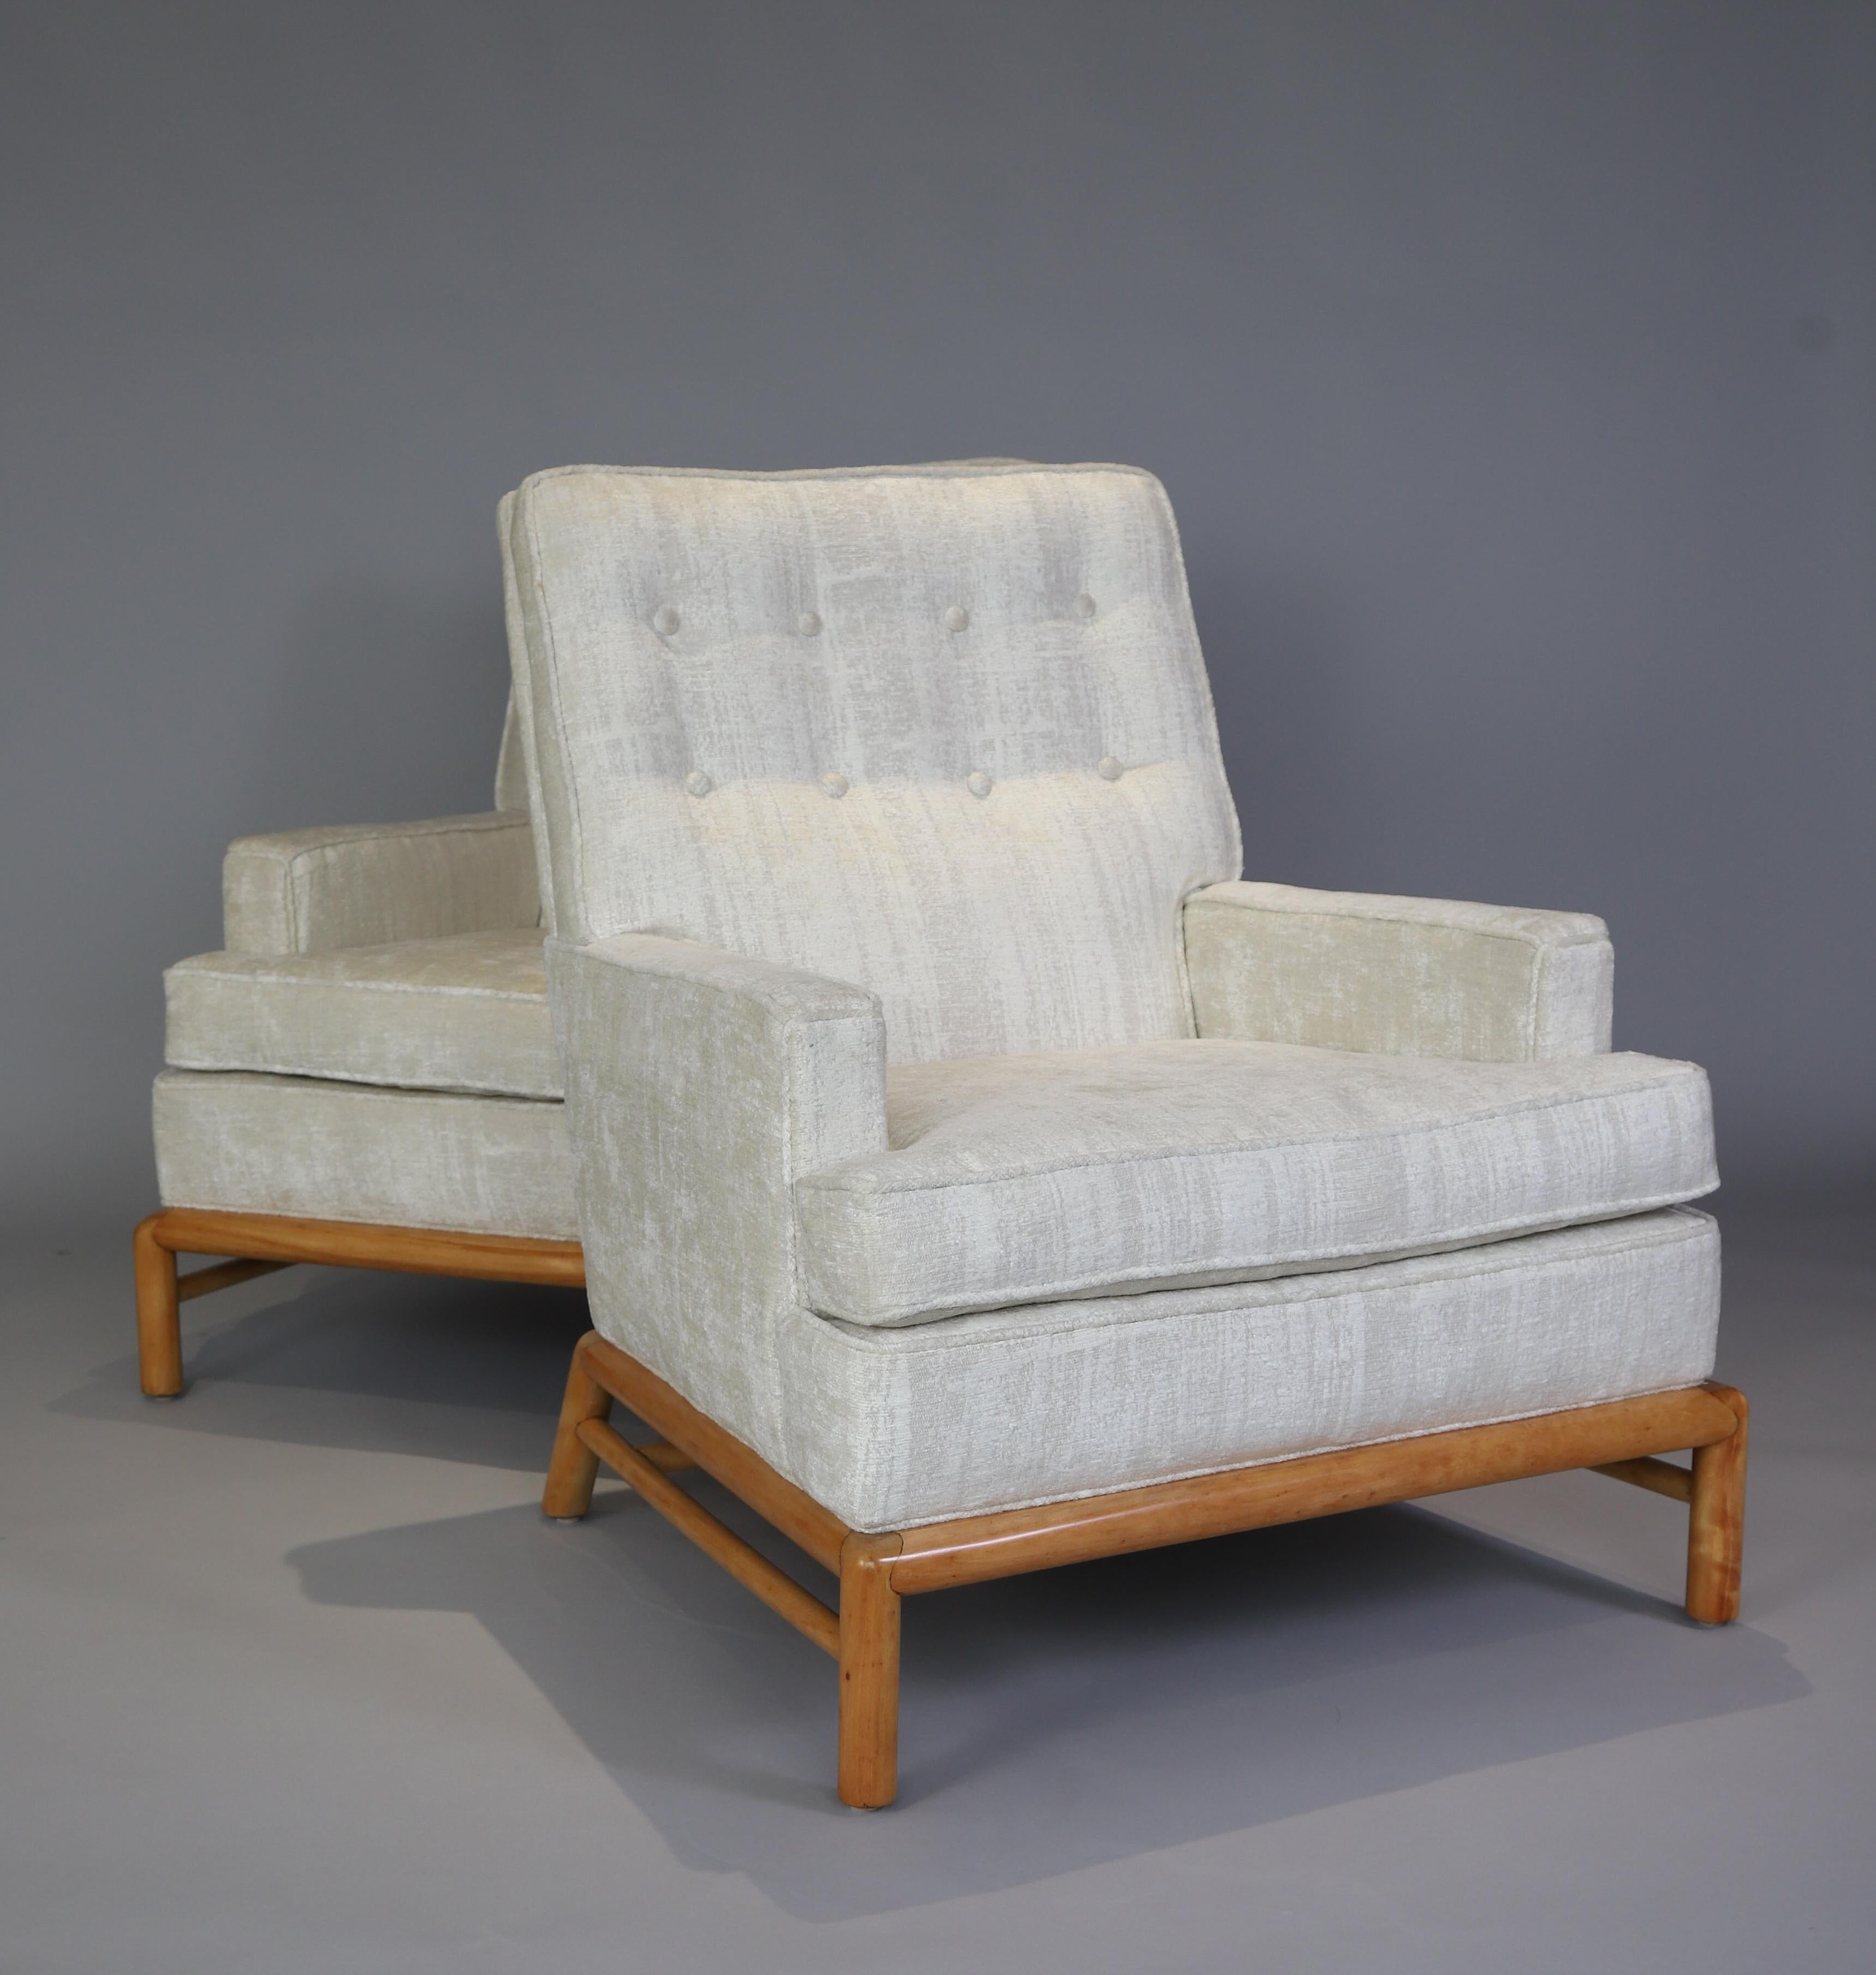 Stunning pair of lounge chairs by T.H. Robsjohn Gibbings for Widdicomb Furiture Co. Chairs have been be beautifully re-upholster in a soft white chenille and bases refinished. Original label has been saved and re-attached. Measure: Seat depth is